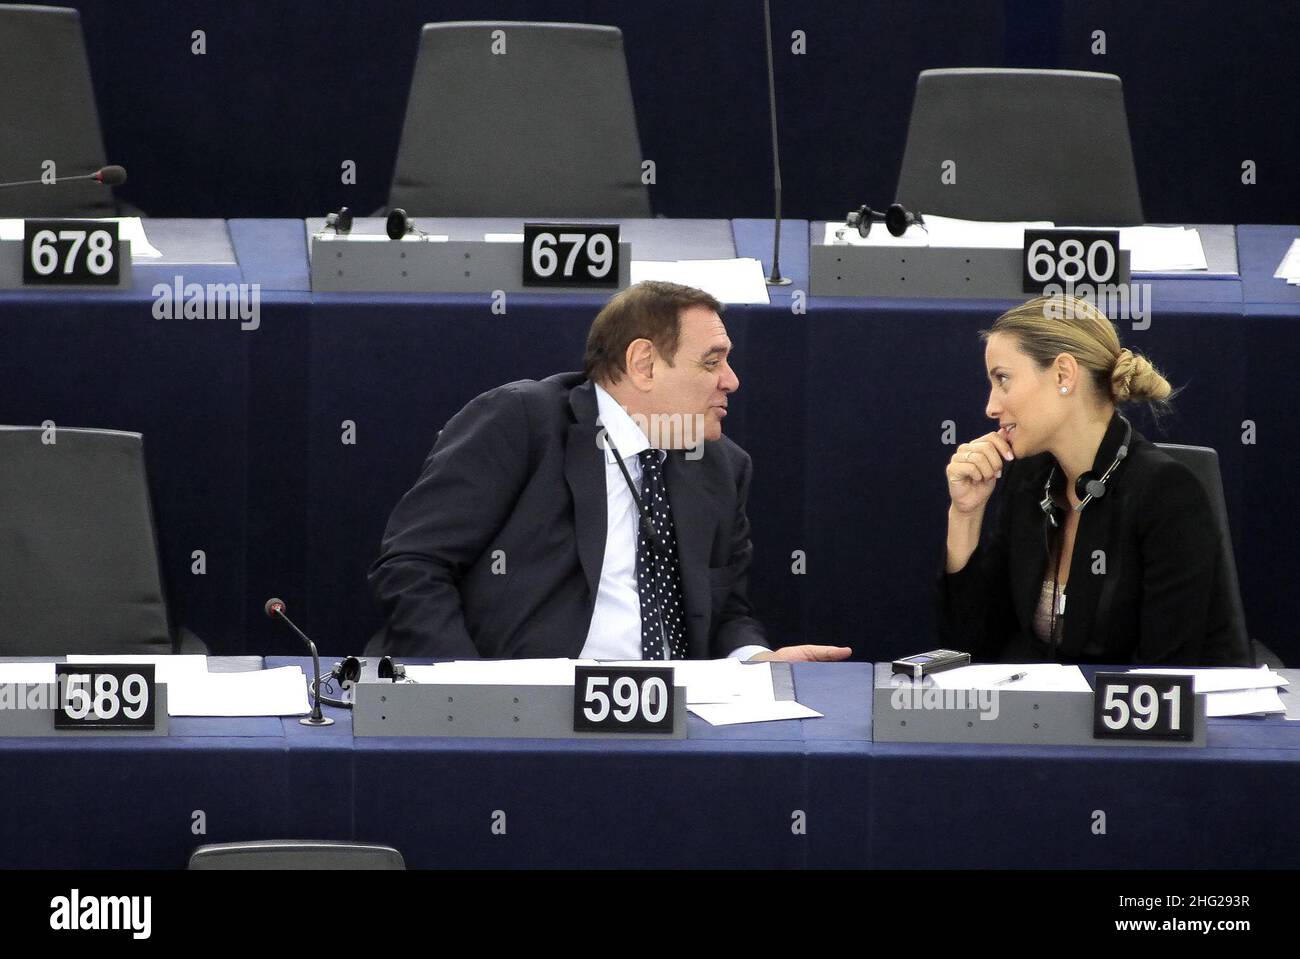 Clemente Mastella and Barbara Matera inside the Louise Weiss building in Strasbourg, France, during an inaugural session of the European Parliament. Stock Photo